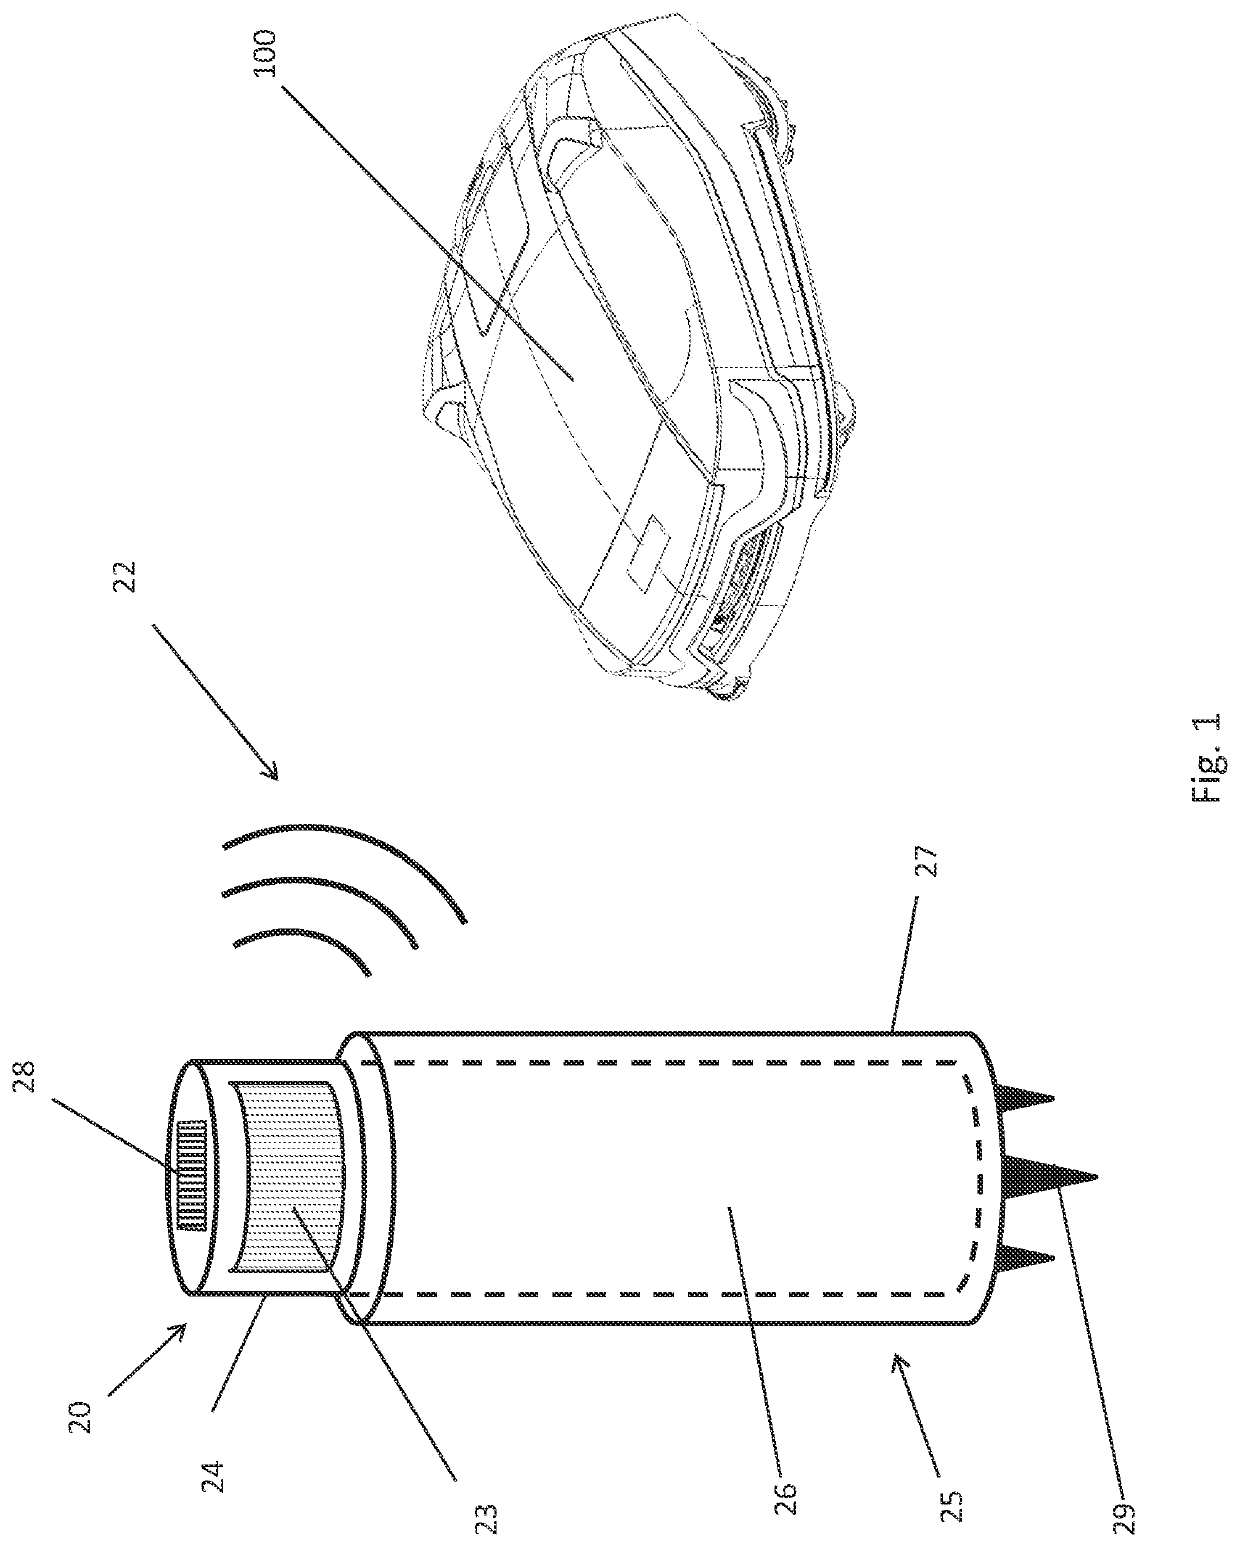 Electronic communication device for use in a navigation system